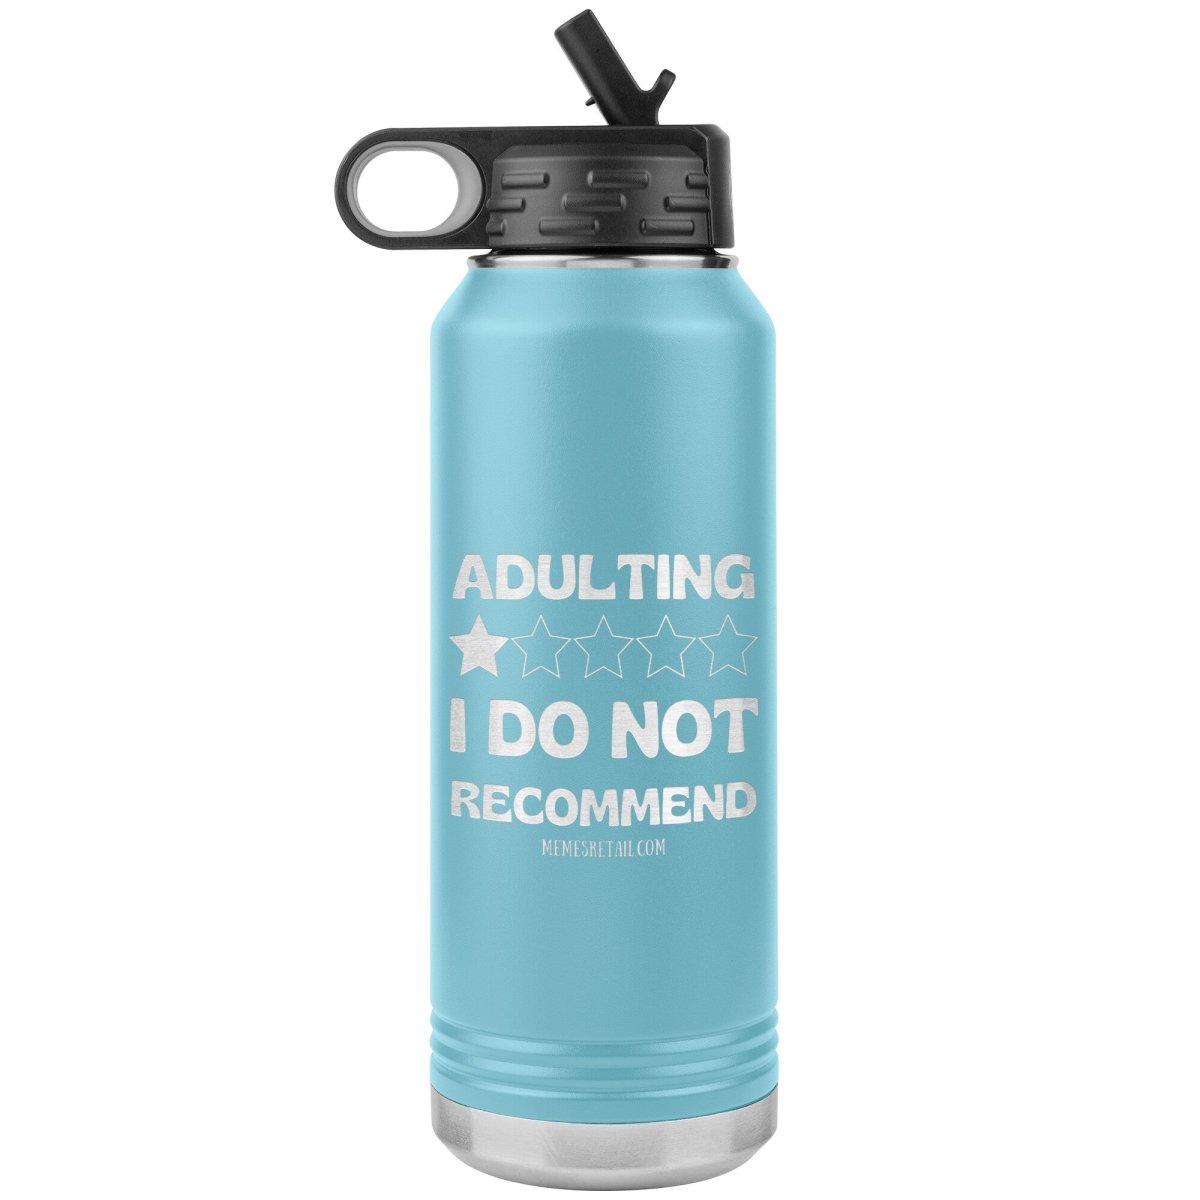 Adulting, 1 Star, I do not recommend 32oz Water Tumblers, Light Blue - MemesRetail.com